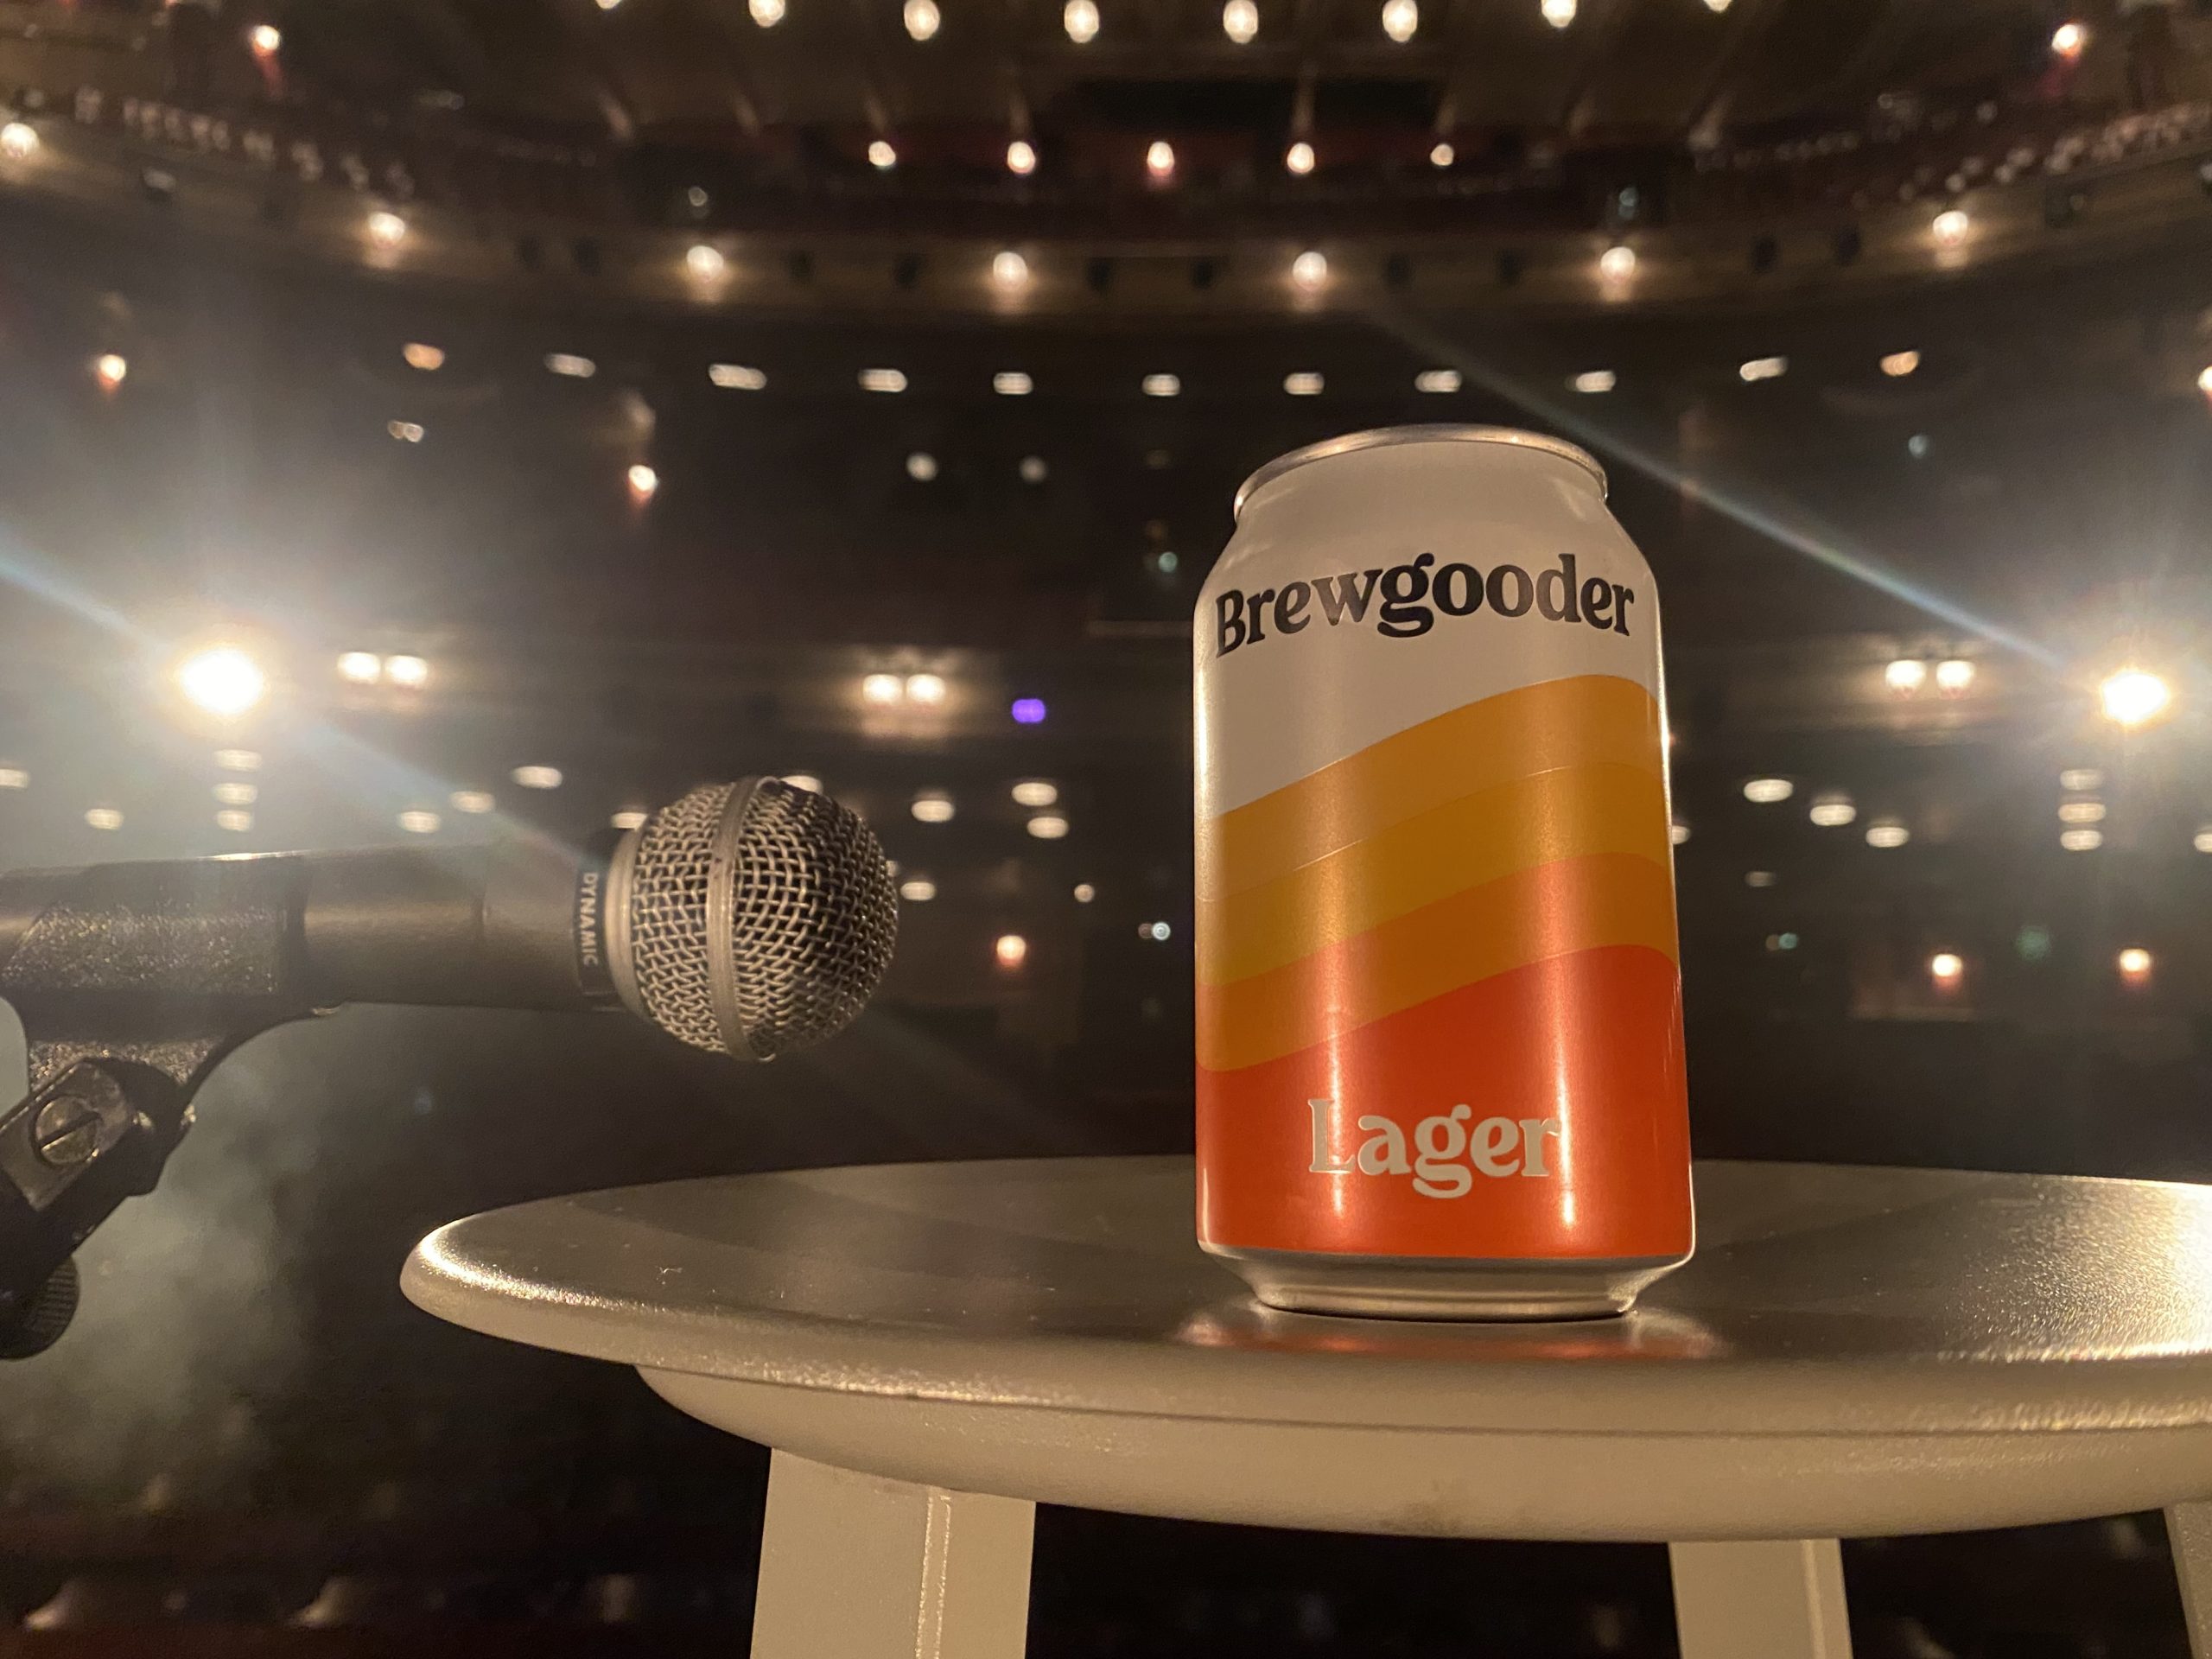 Capital Theatres Announce New Corporate Partnership with Brewgooder - Craft beer brewed with heart and purpose to empower the lives of others.